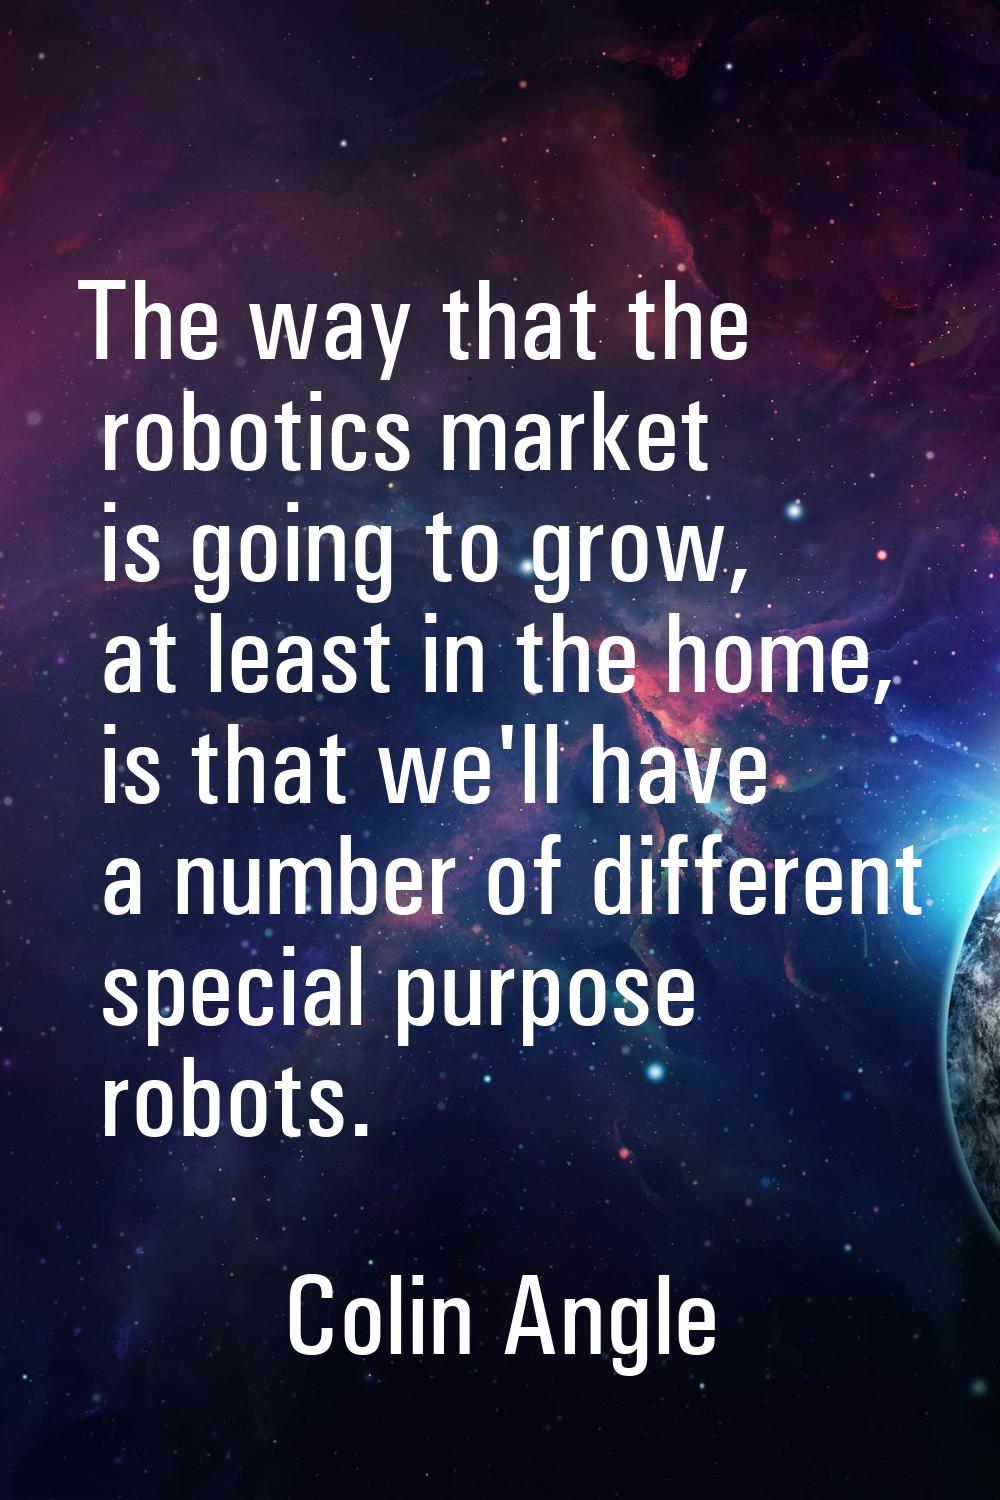 The way that the robotics market is going to grow, at least in the home, is that we'll have a numbe